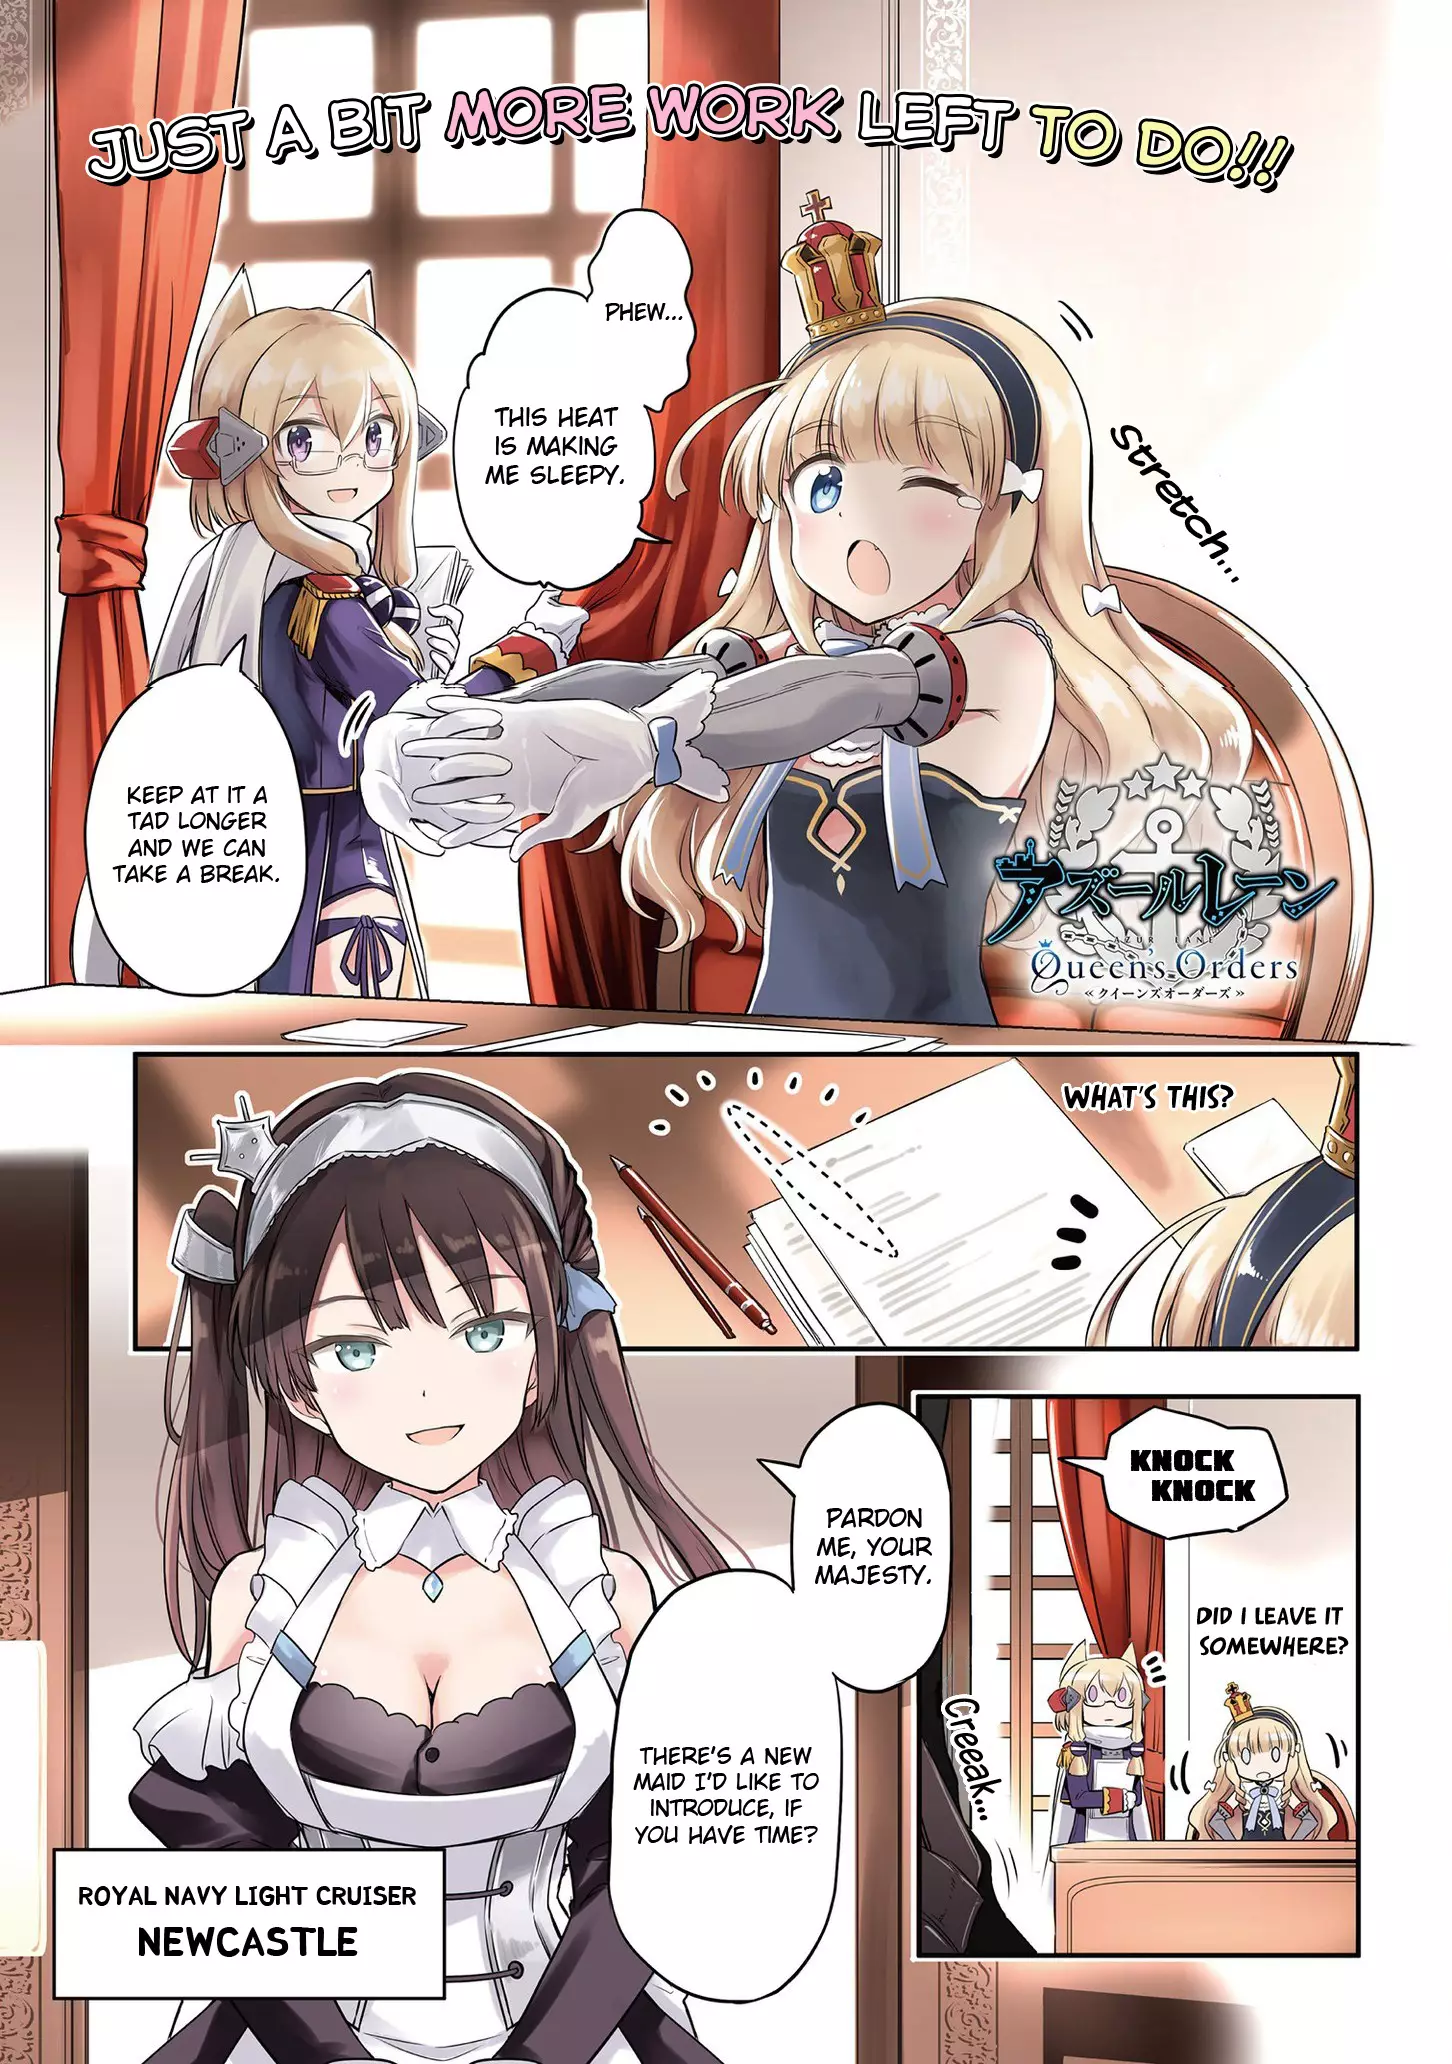 Azur Lane: Queen's Orders - 57 page 1-f5b40cc0